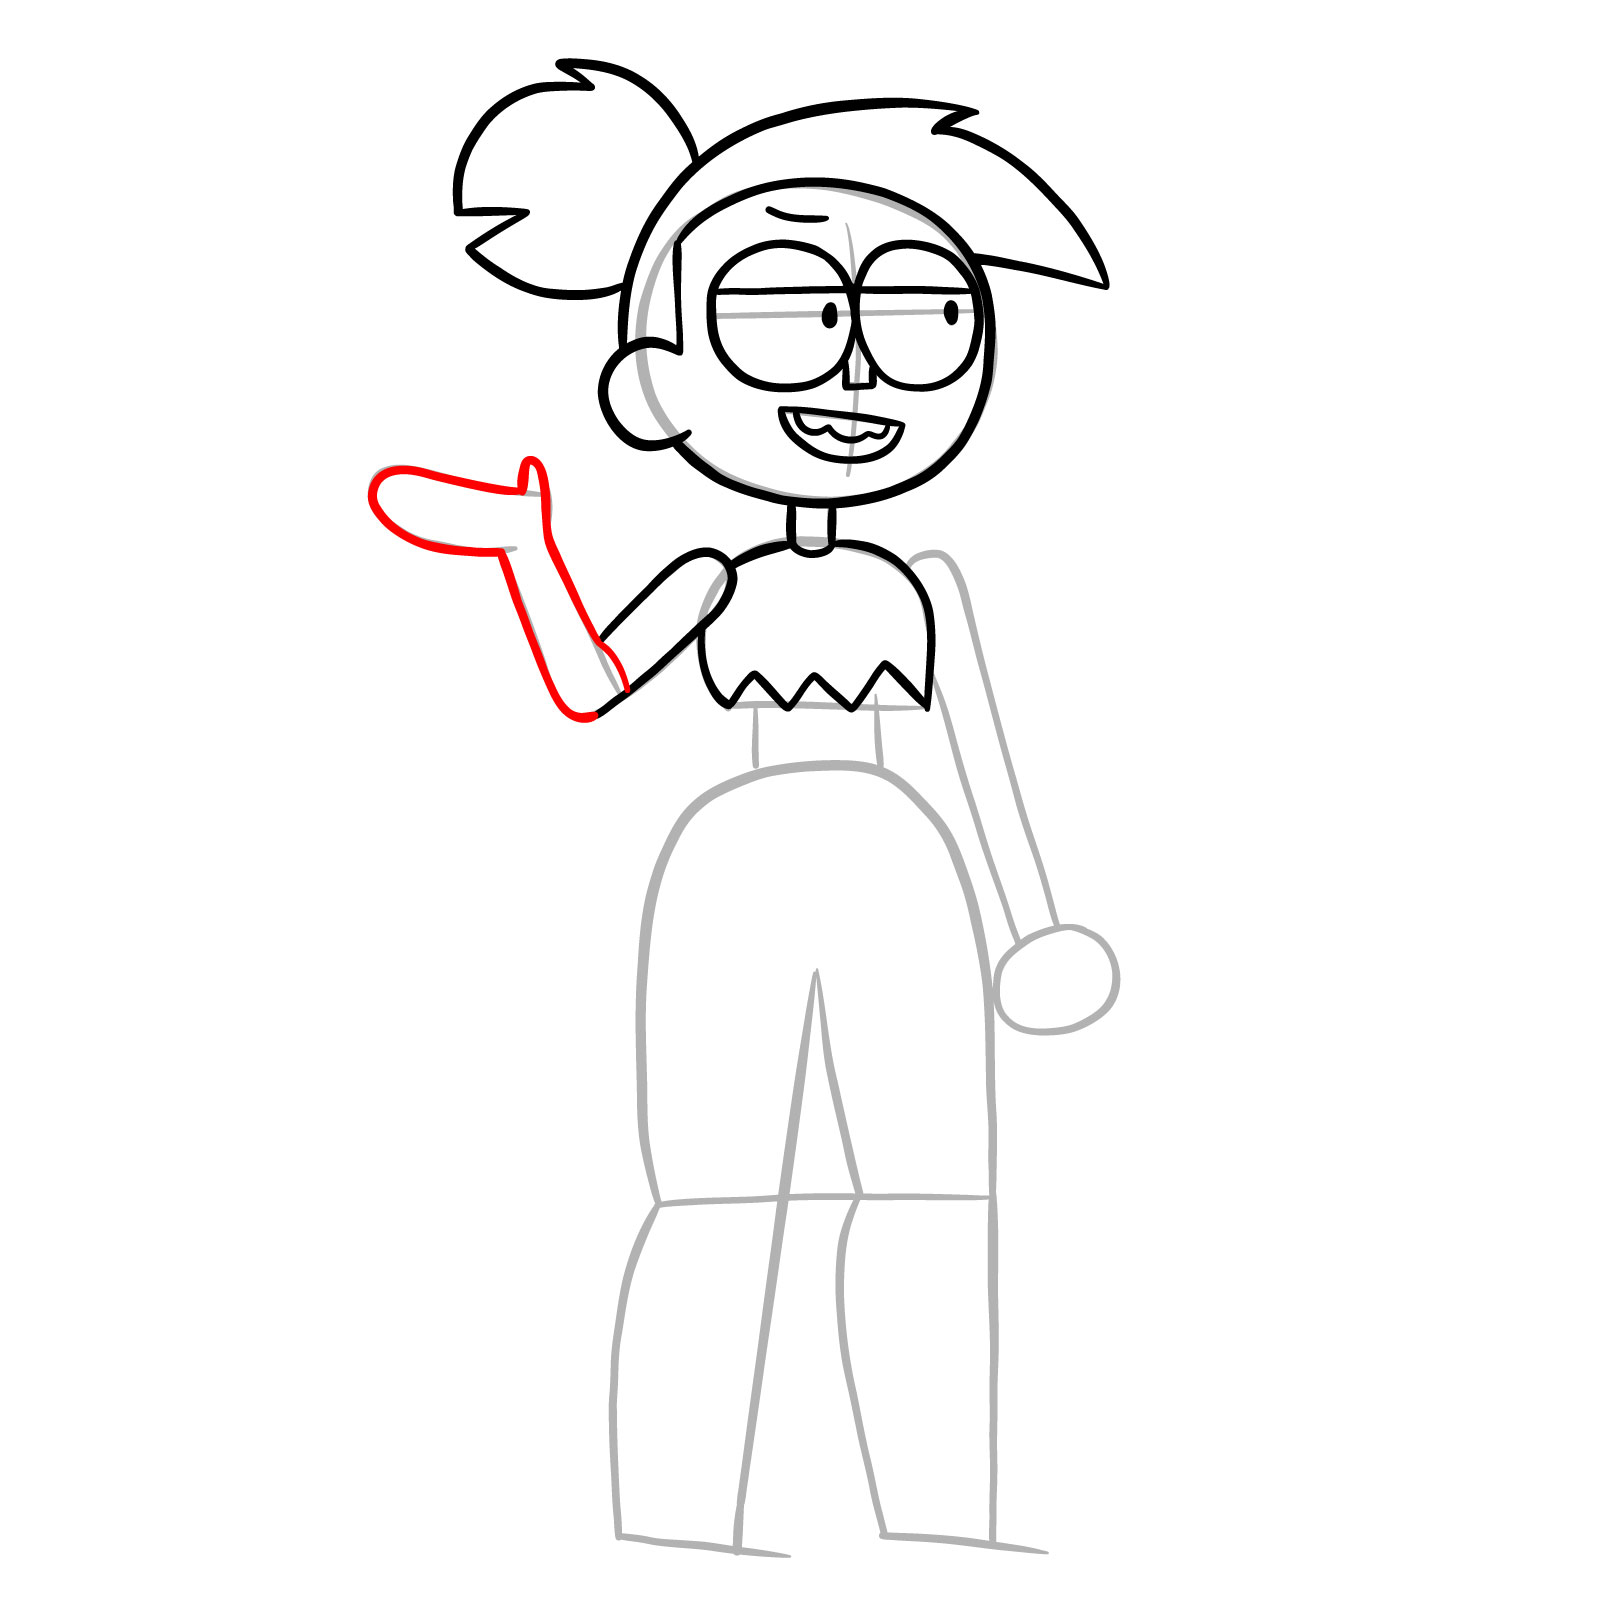 How to draw Enid Mettle from OK K.O.! - step 15